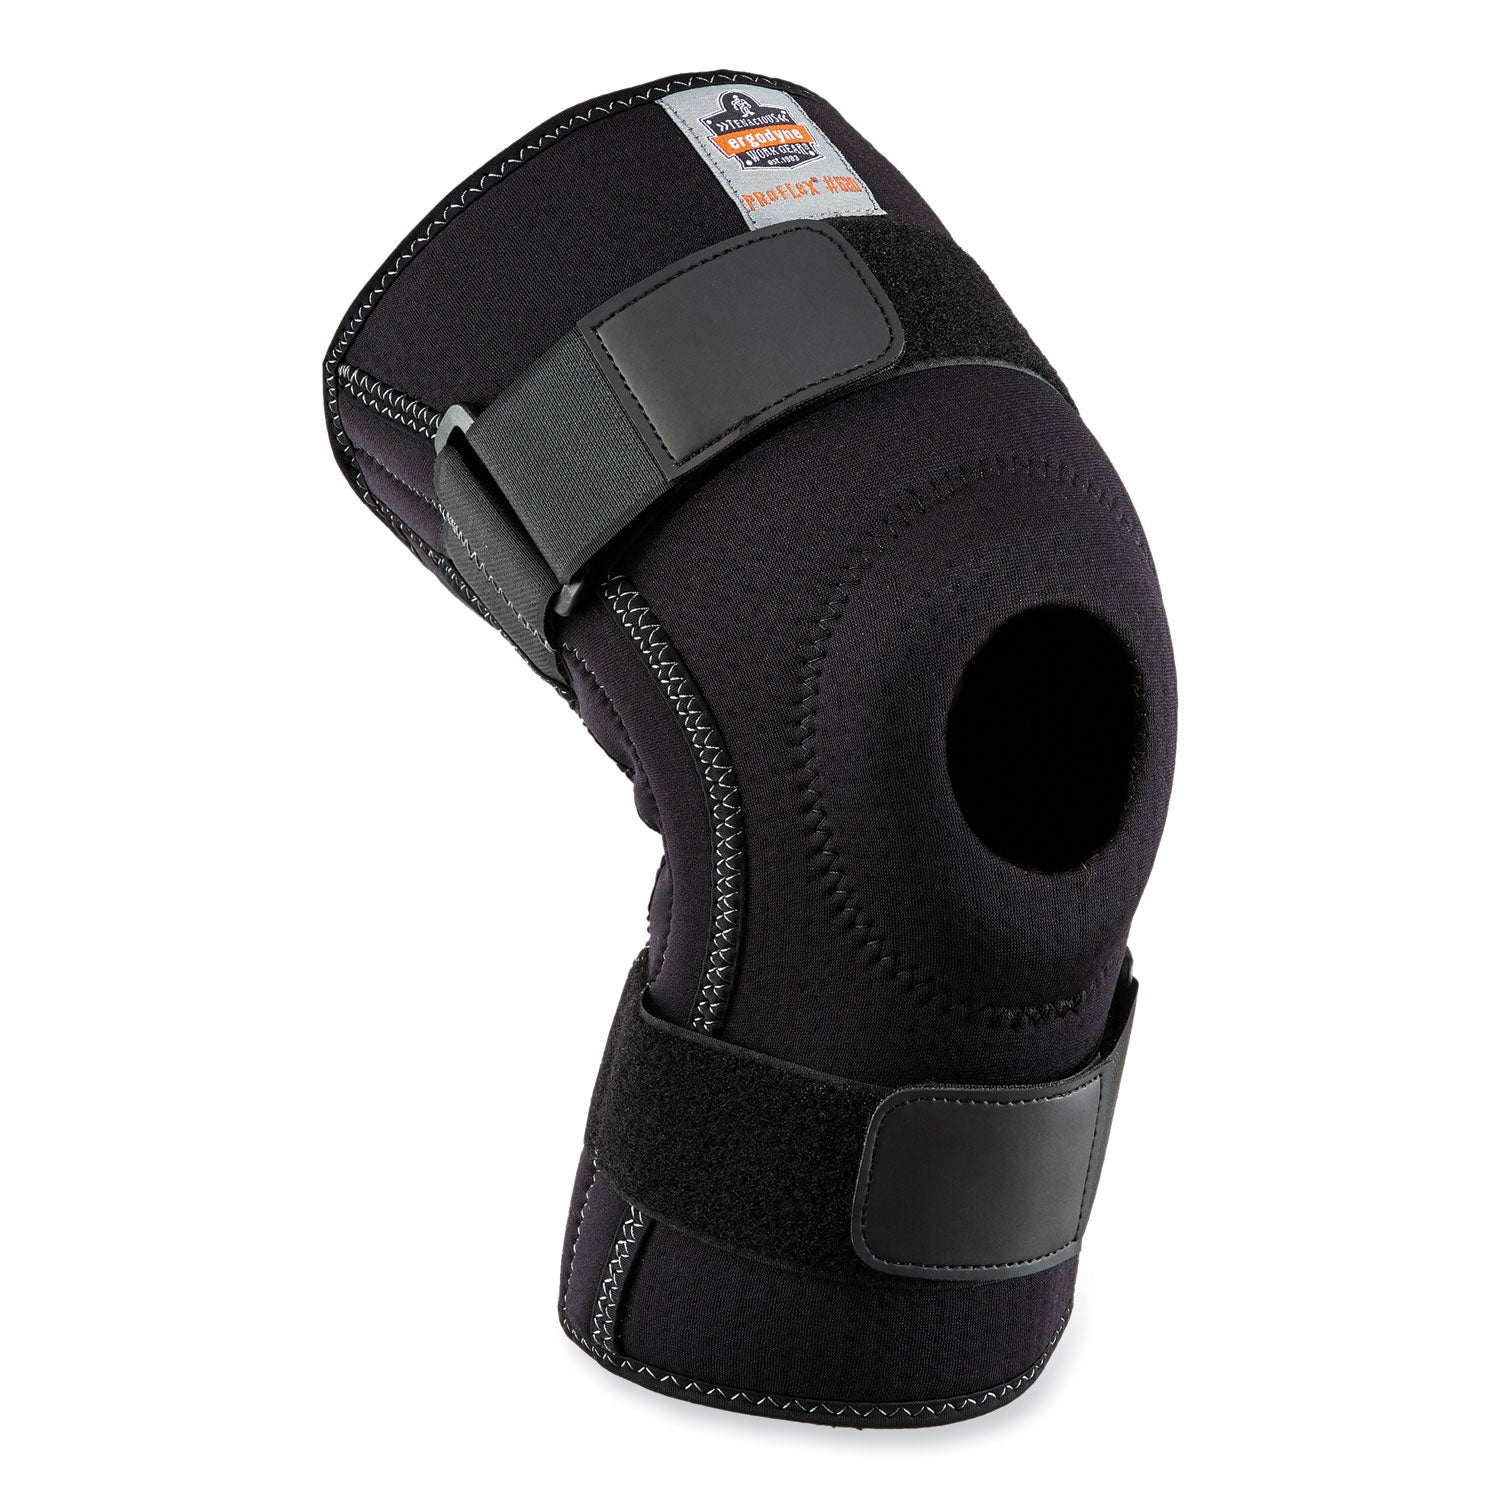 proflex-620-open-patella-spiral-stays-knee-sleeve-large-black-ships-in-1-3-business-days_ego16544 - 1